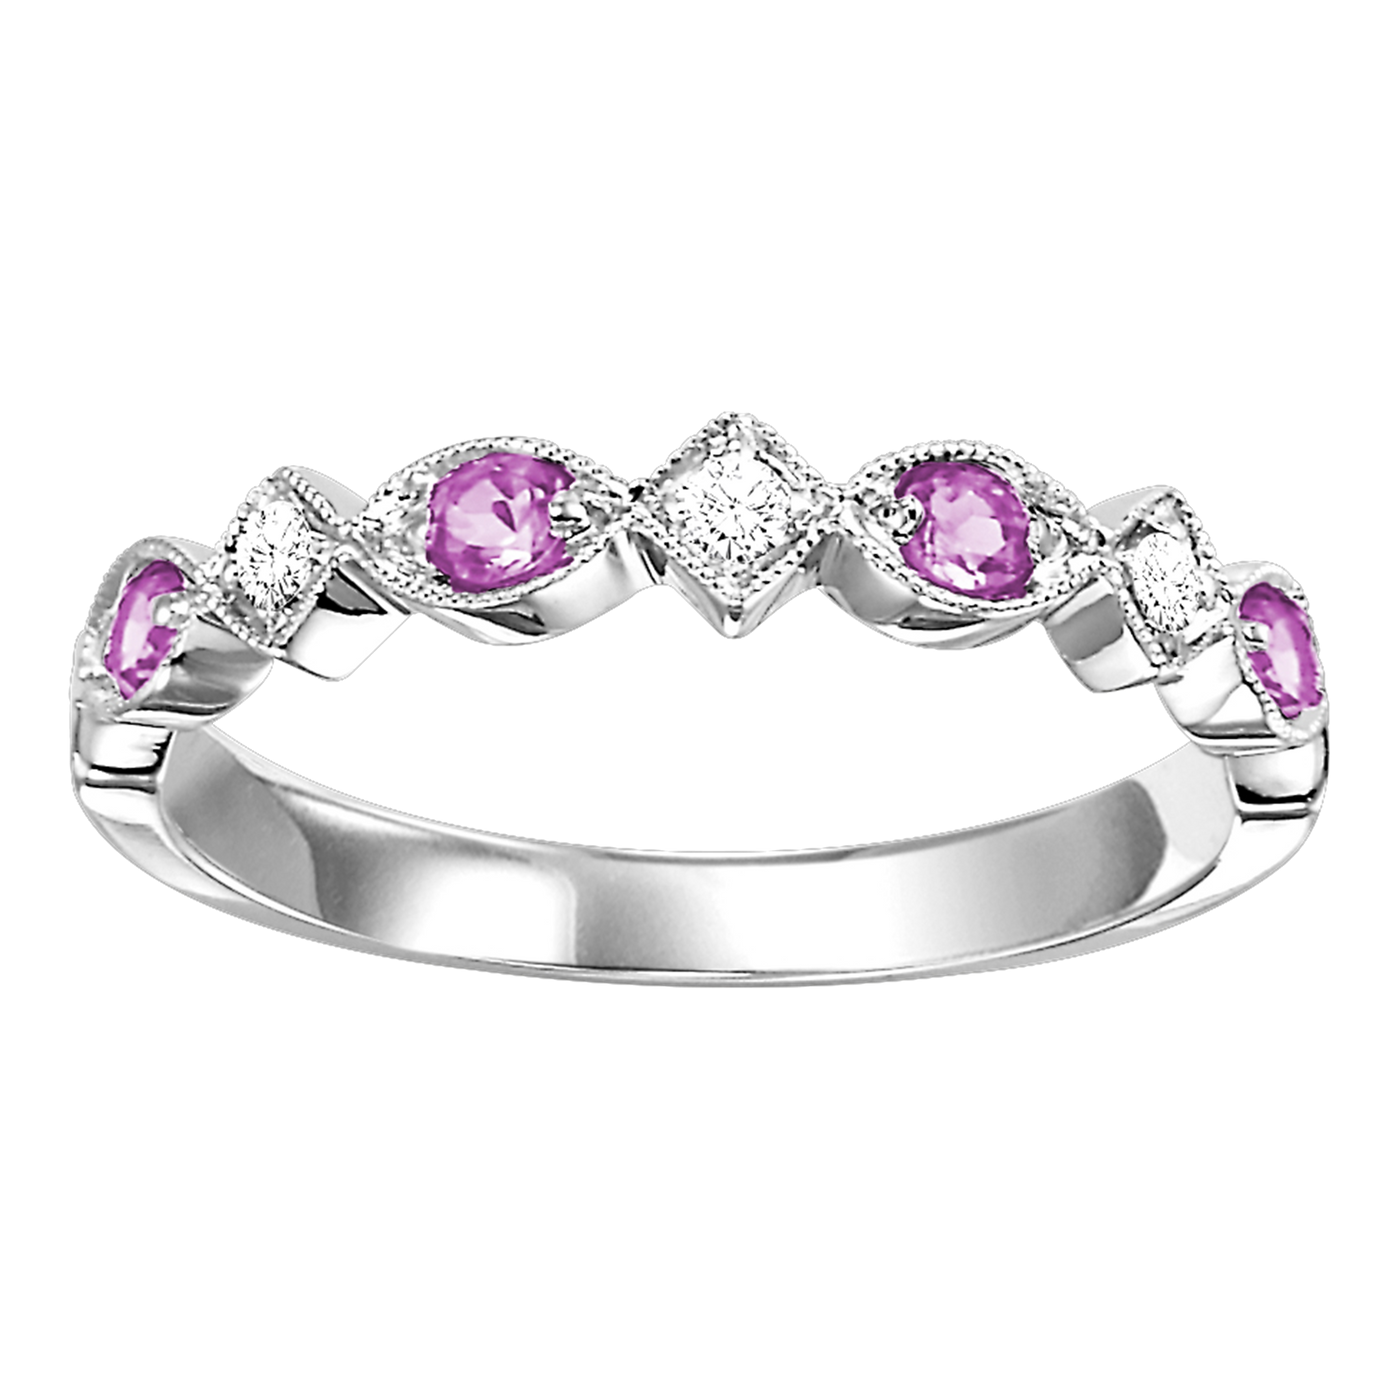 10K White Gold .22ctw Geometric Style Diamond Ring with Pink Sapphires